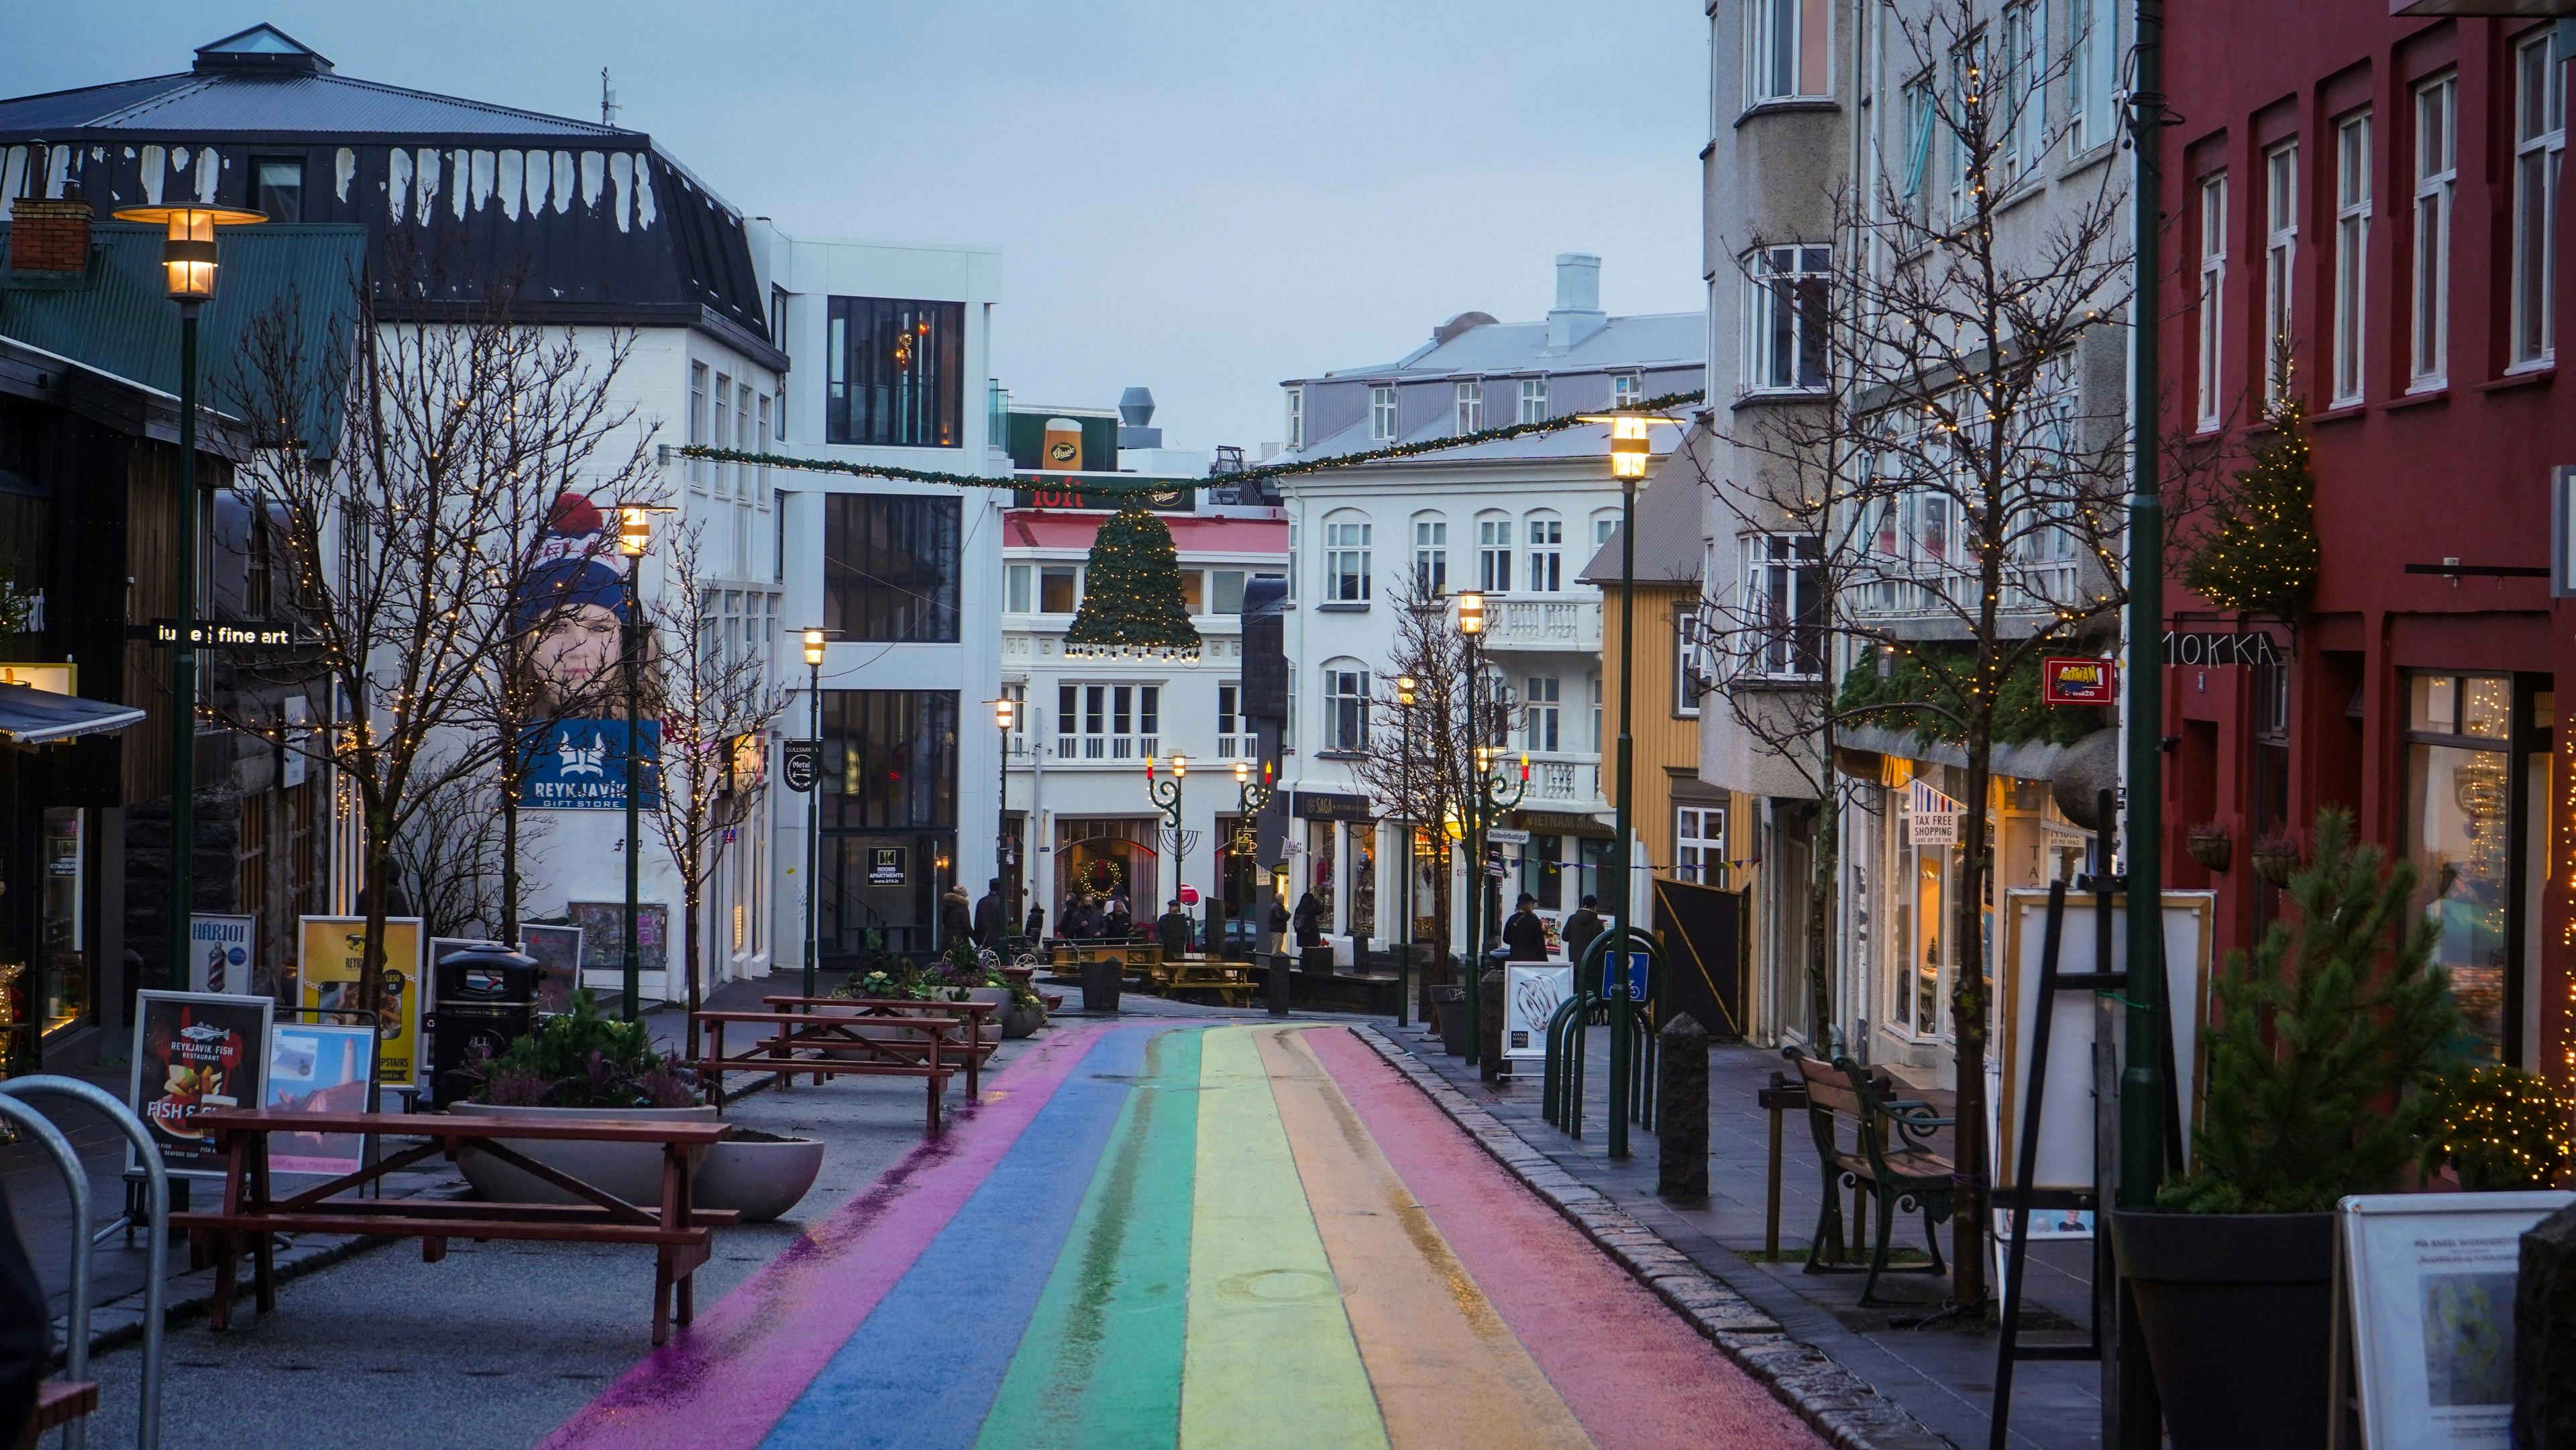 A view of Reykjavík downtown area, featuring the rainbow street and colorful buildings